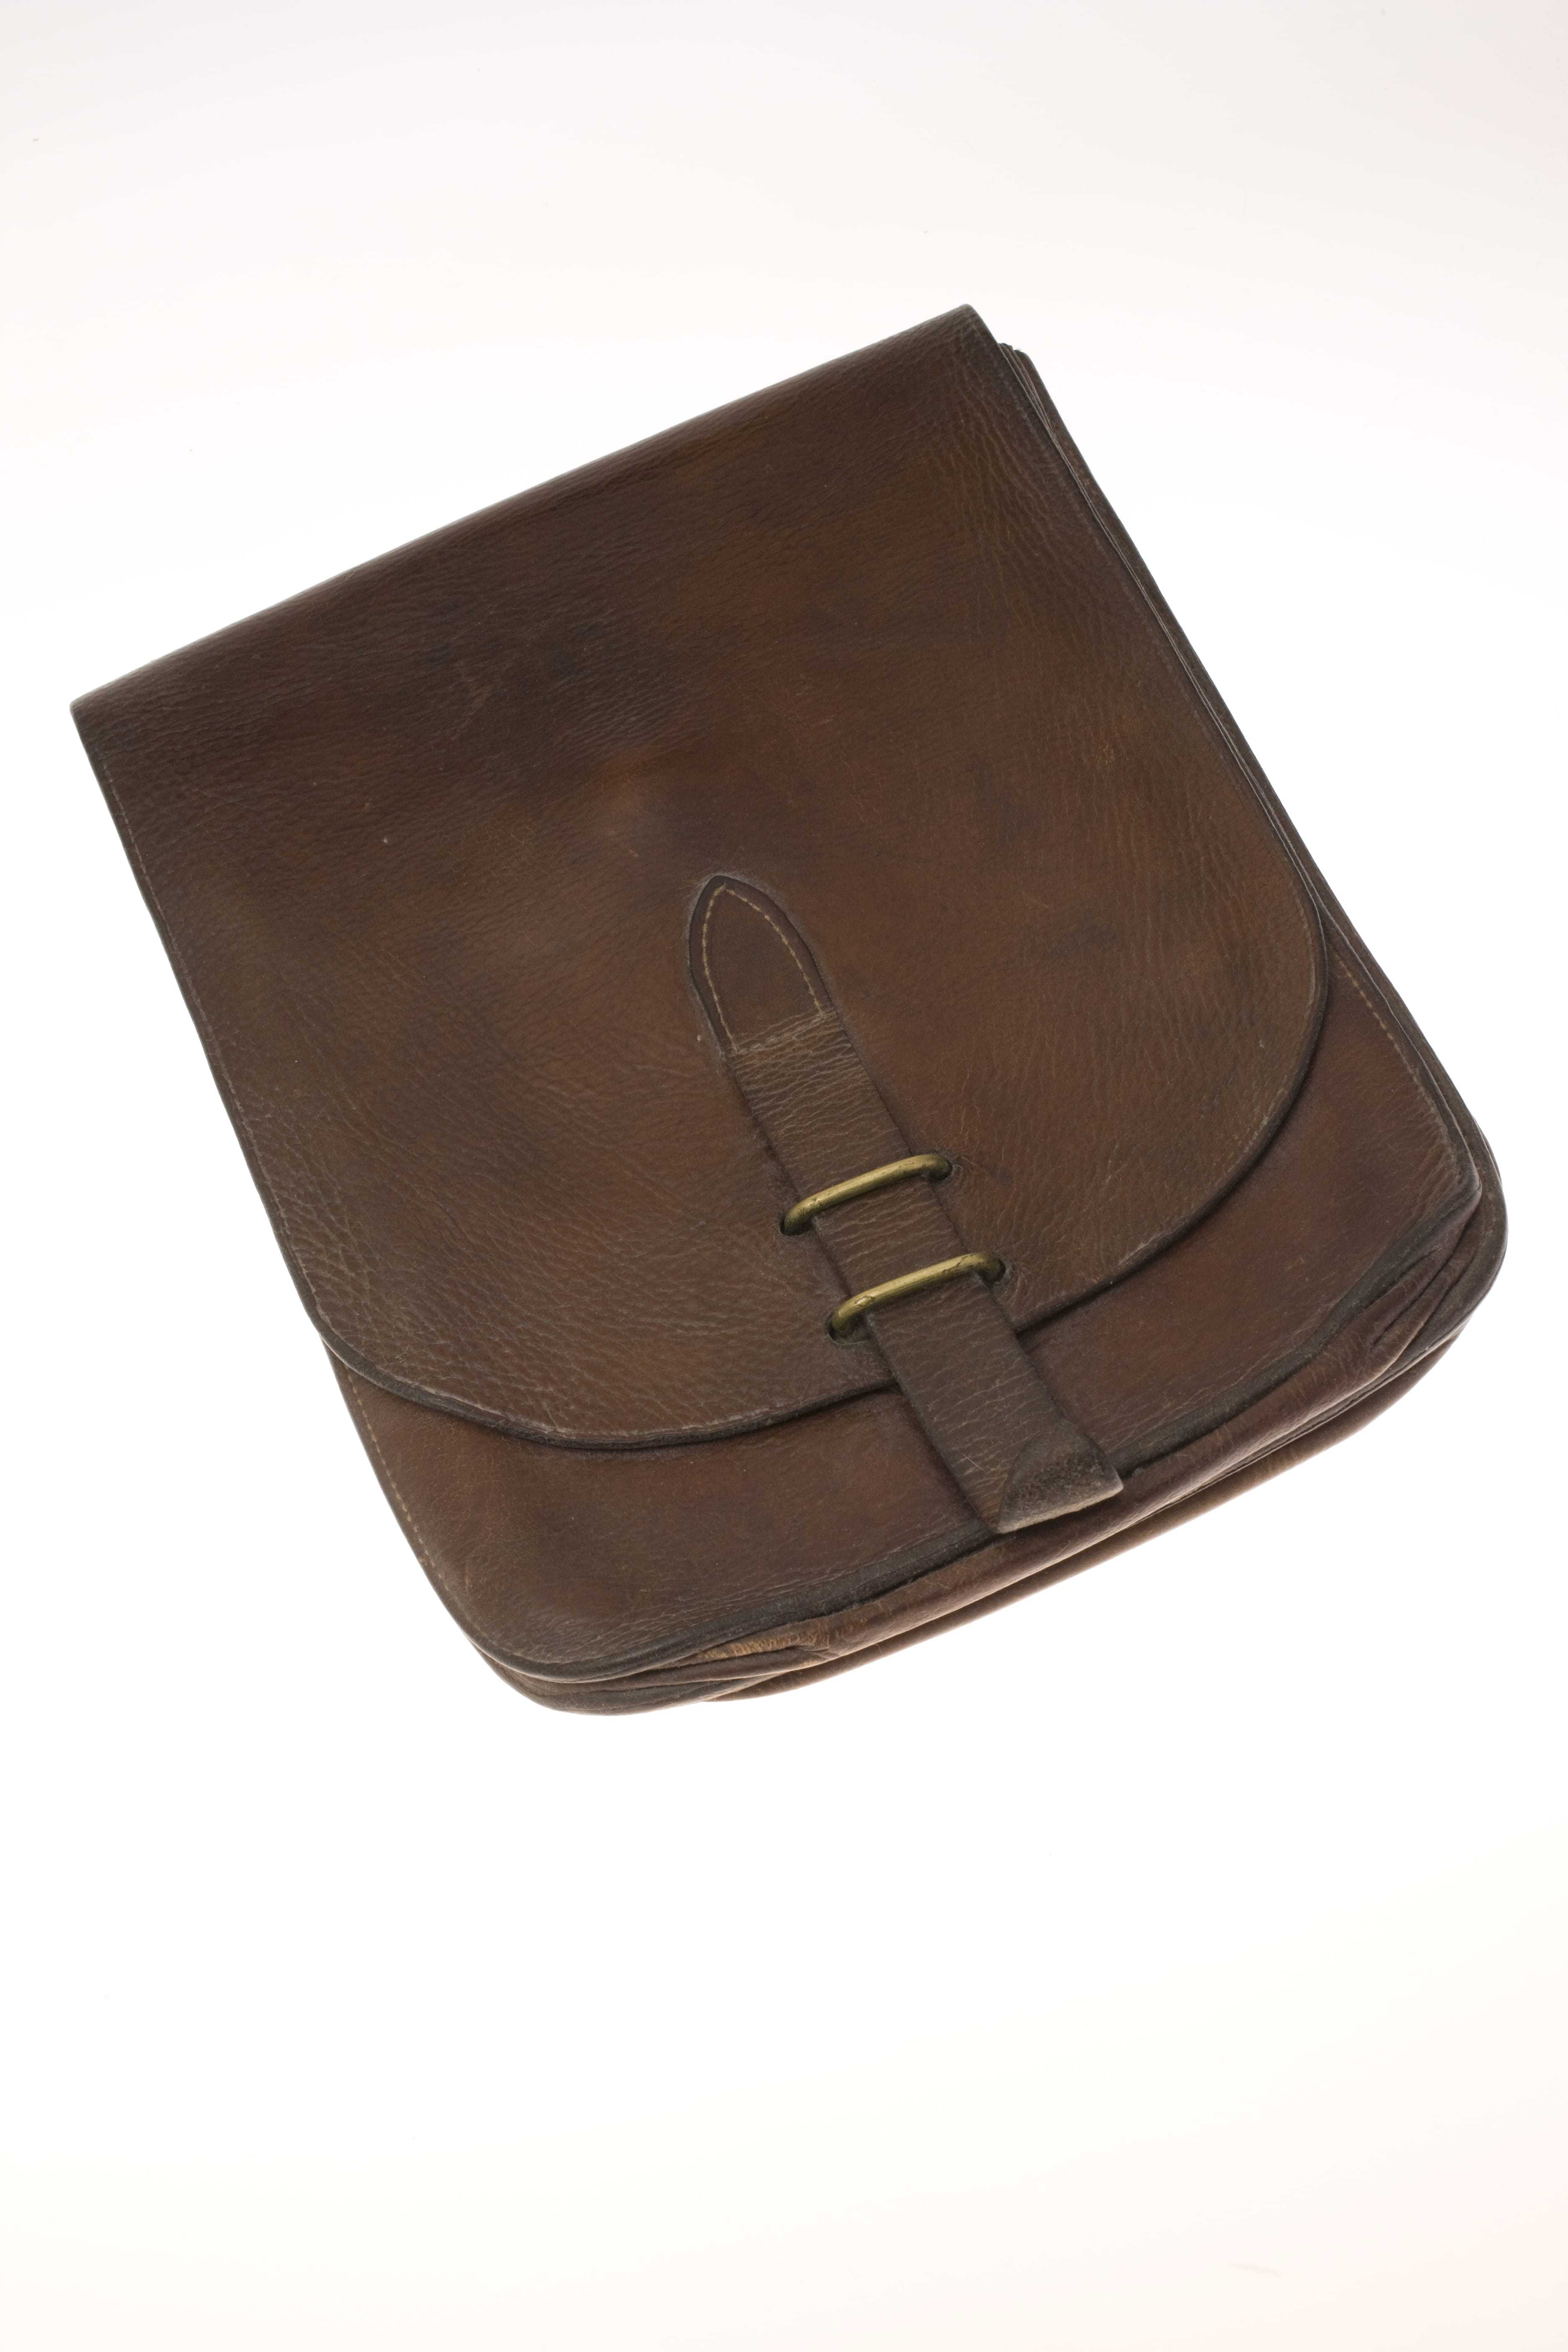 A brown leather saddle bag with a gold clasp